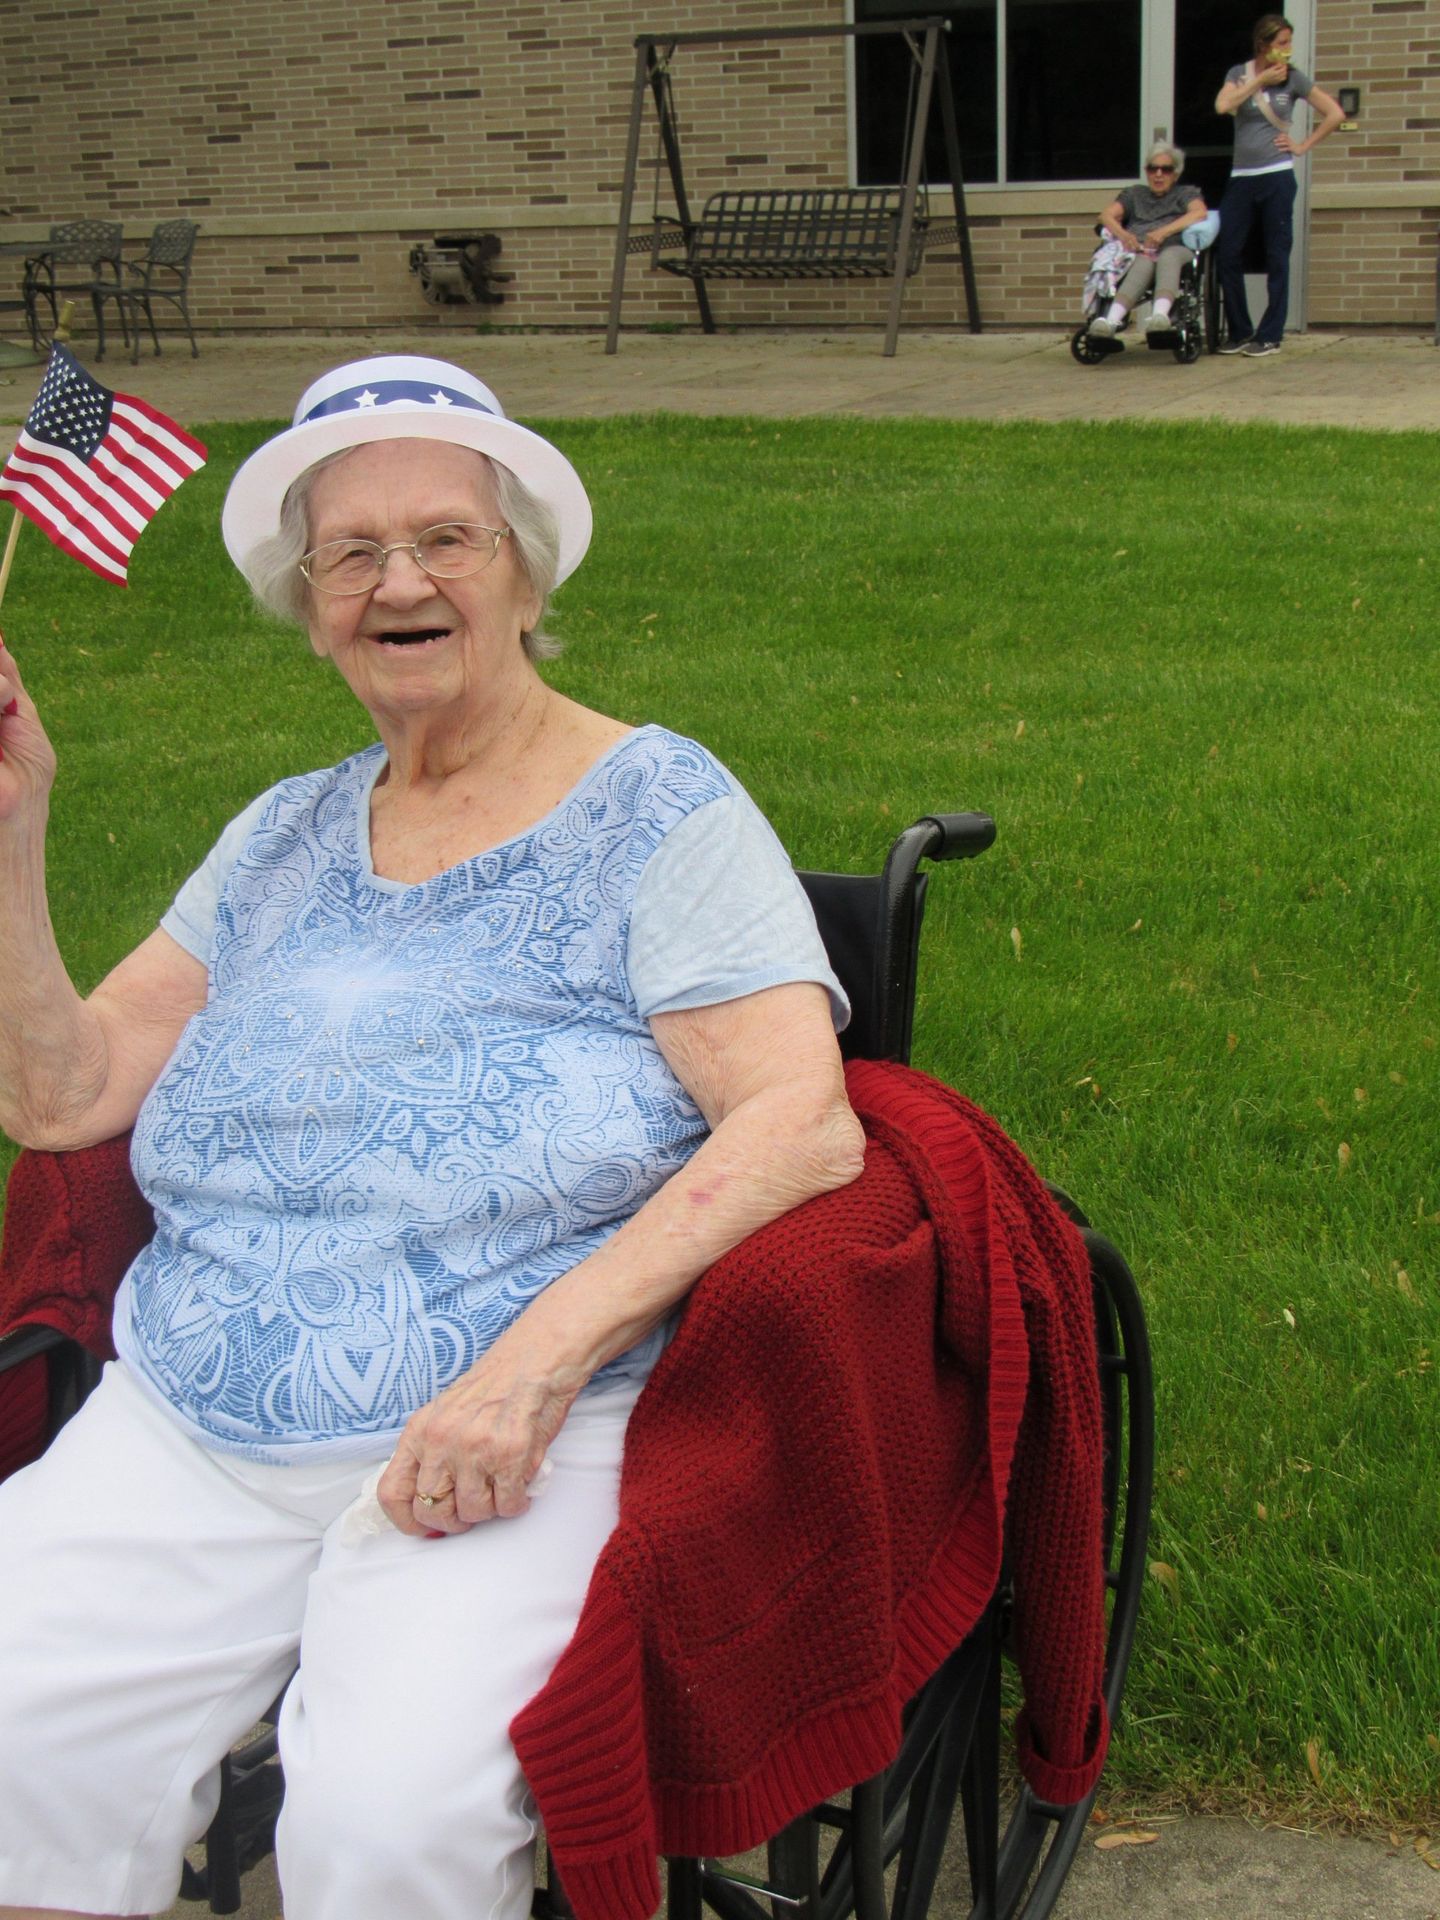 Elder holding American flag outside at Lenawee Medical Care Facility in Adrian, MI